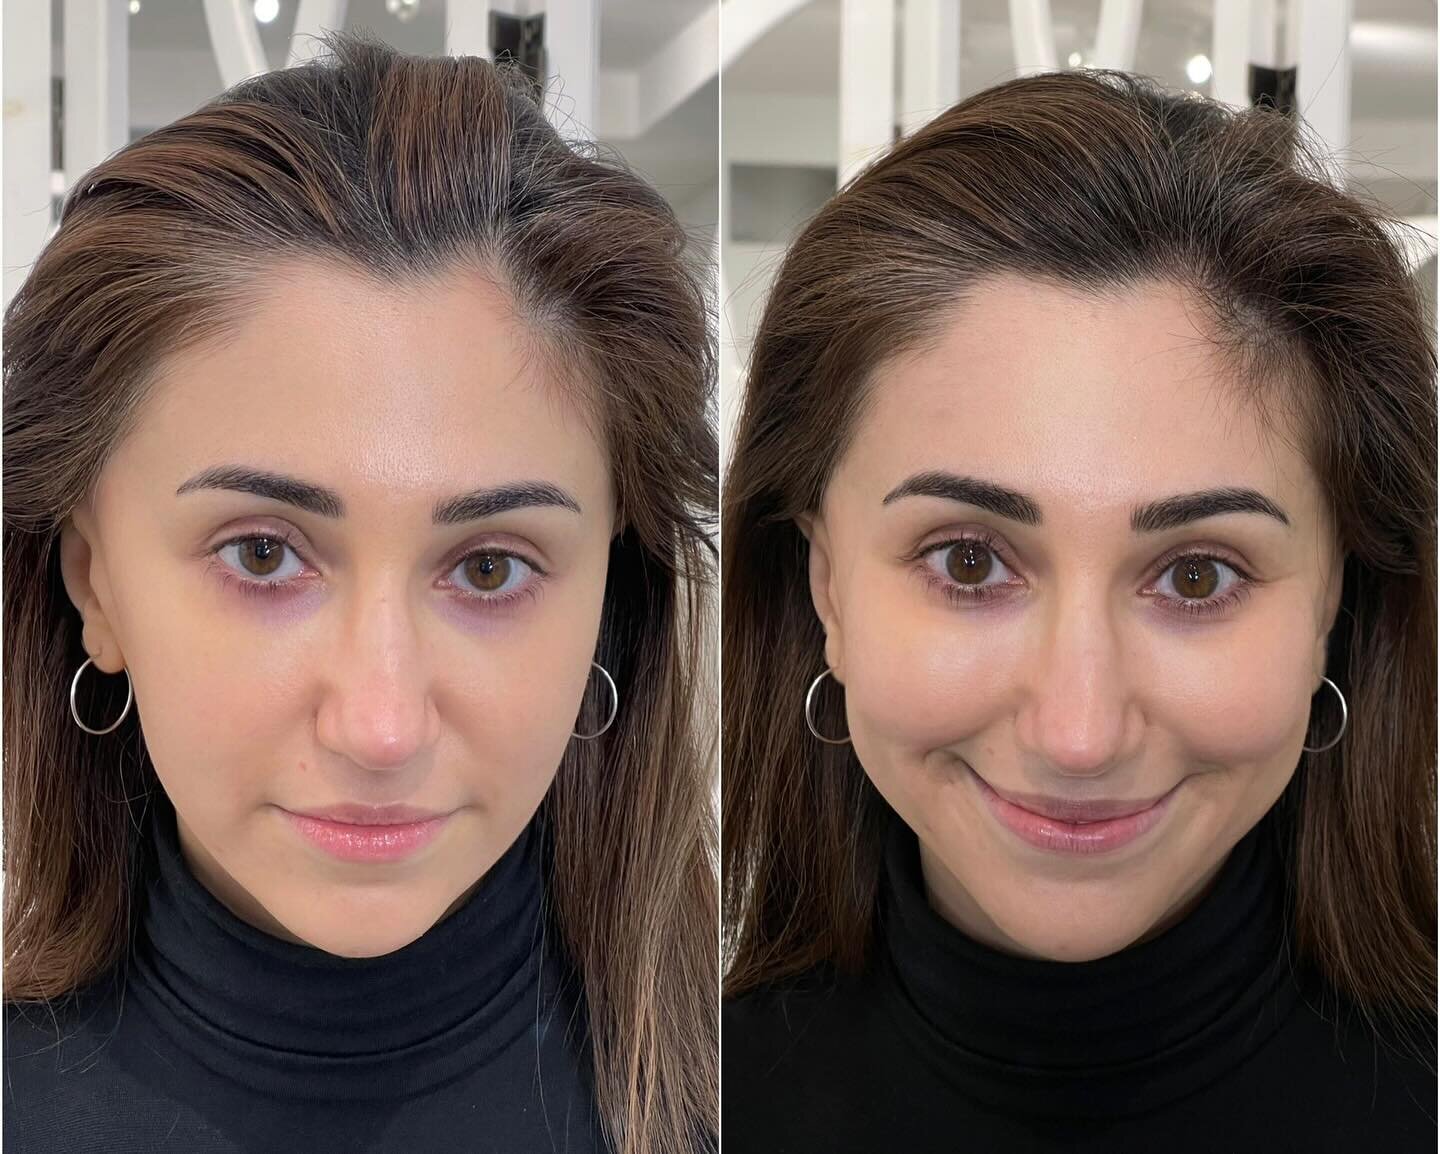 Hairline Microblading! Adding density and fullness just where you need it. Results are immediate, and we can customize exactly where you need that extra hairline help. 
.
Hairline Rescue by Kim (Senior Specialst, Chicago)
.
#hairline #hairlinerescue 